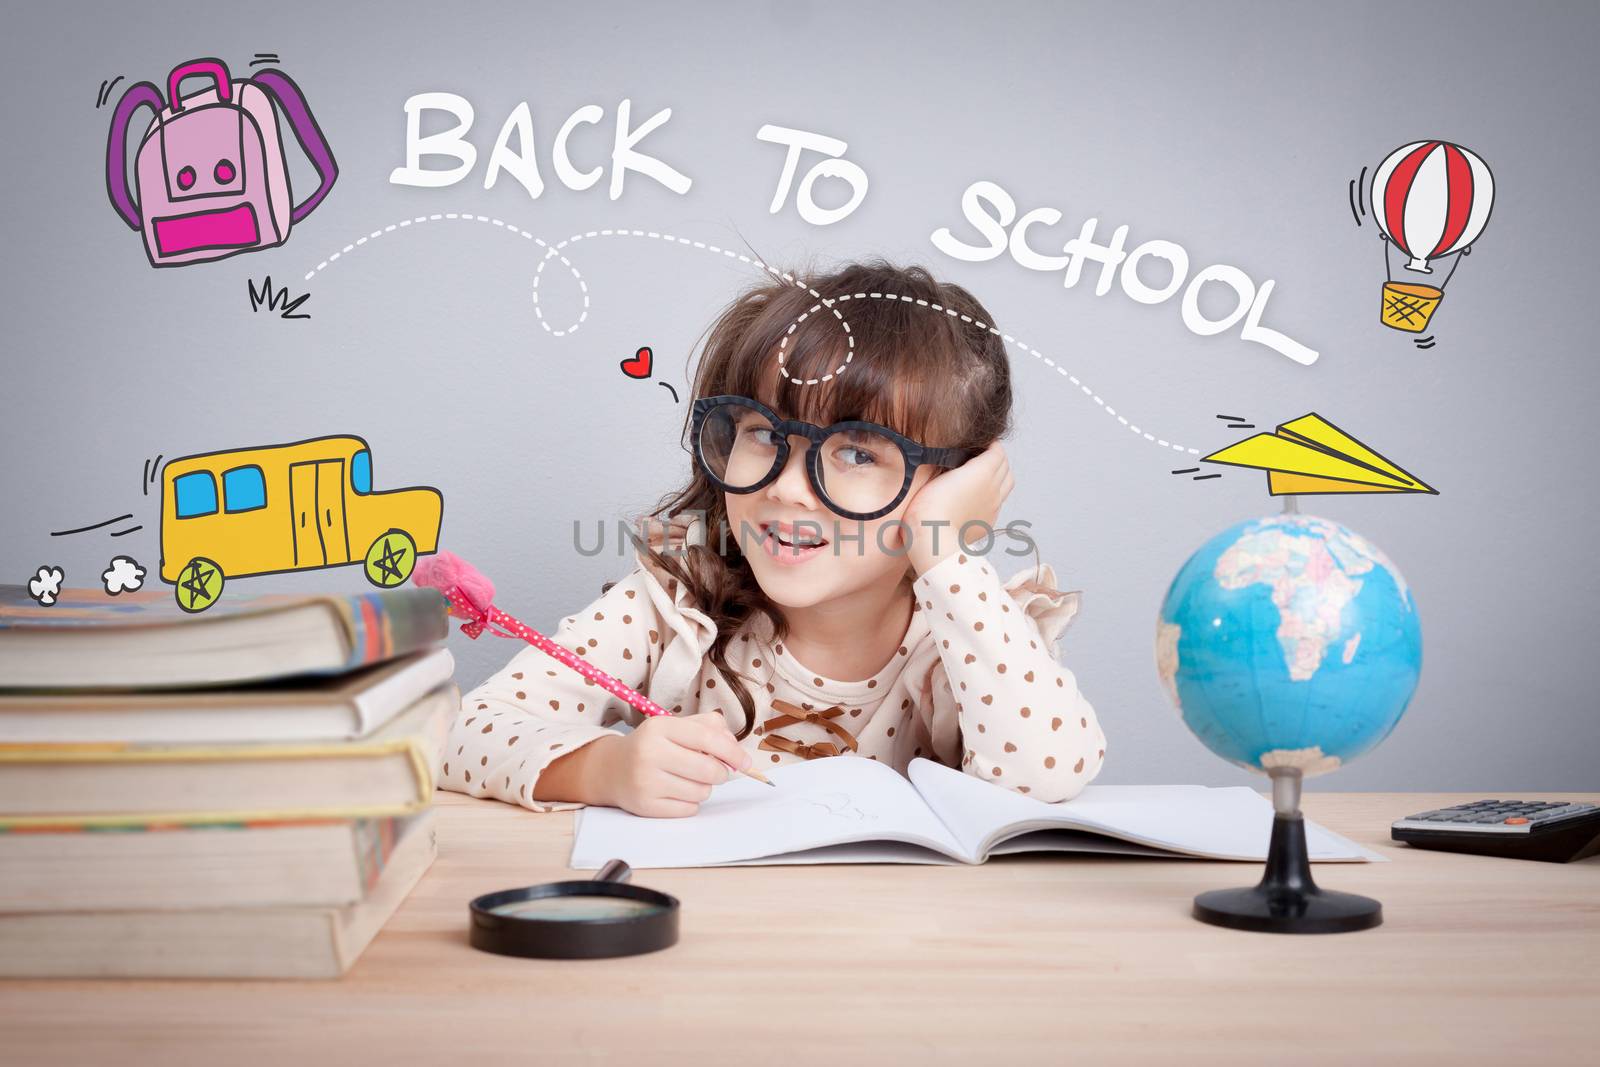 back to school  concept. cute little girl wear glasses do homework at home with word back to school and cute cartoon on head. learning, teaching and education educate children